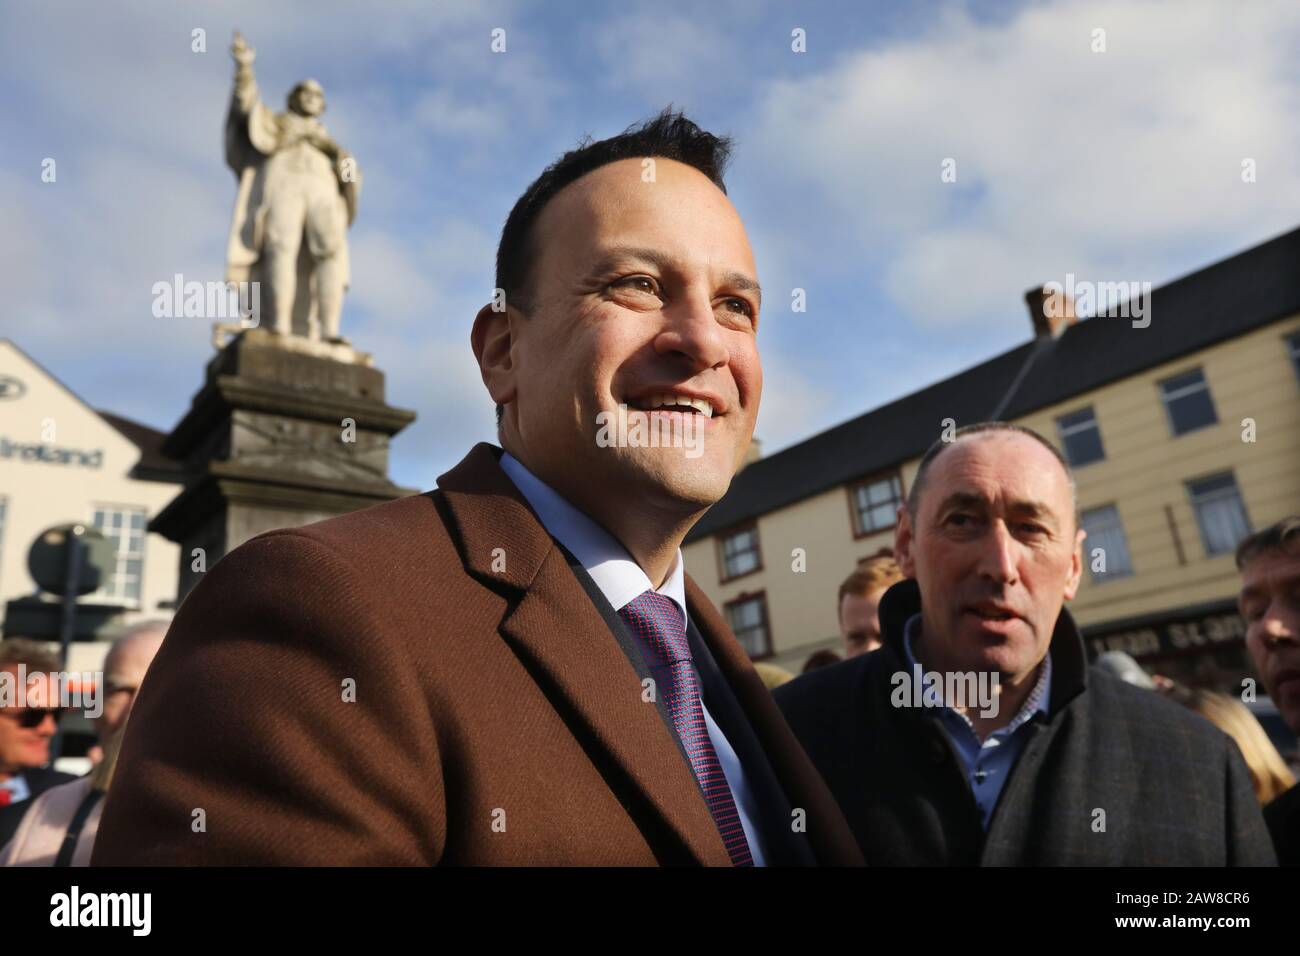 Tullow, Carlow, Ireland. 6/February/2020 General Election. Left to right. Taoiseach and Fine Gael leader Leo Varadkar, and local candidate Pat Deering, with the statue of 1798 hero Father Murphy in the background, during a canvass of Tulow in County Carlow. Photo: Eamonn Farrell/RollingNews.ie/Alamy Live News Stock Photo